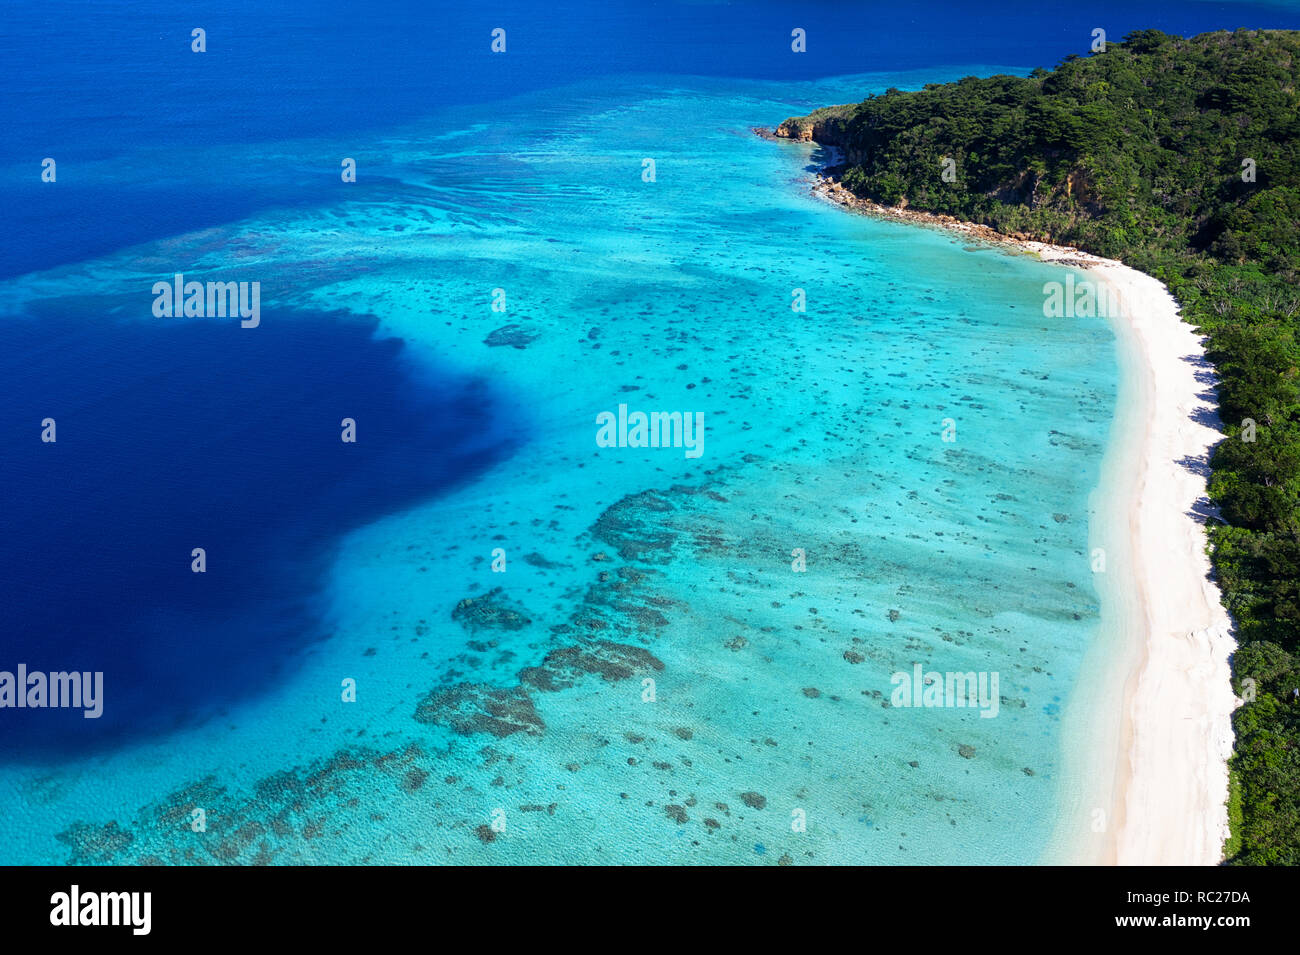 Aerial view of paradise beach, coral reef and turquoise waters at Iriomote jima, Japan, taken by drone Stock Photo